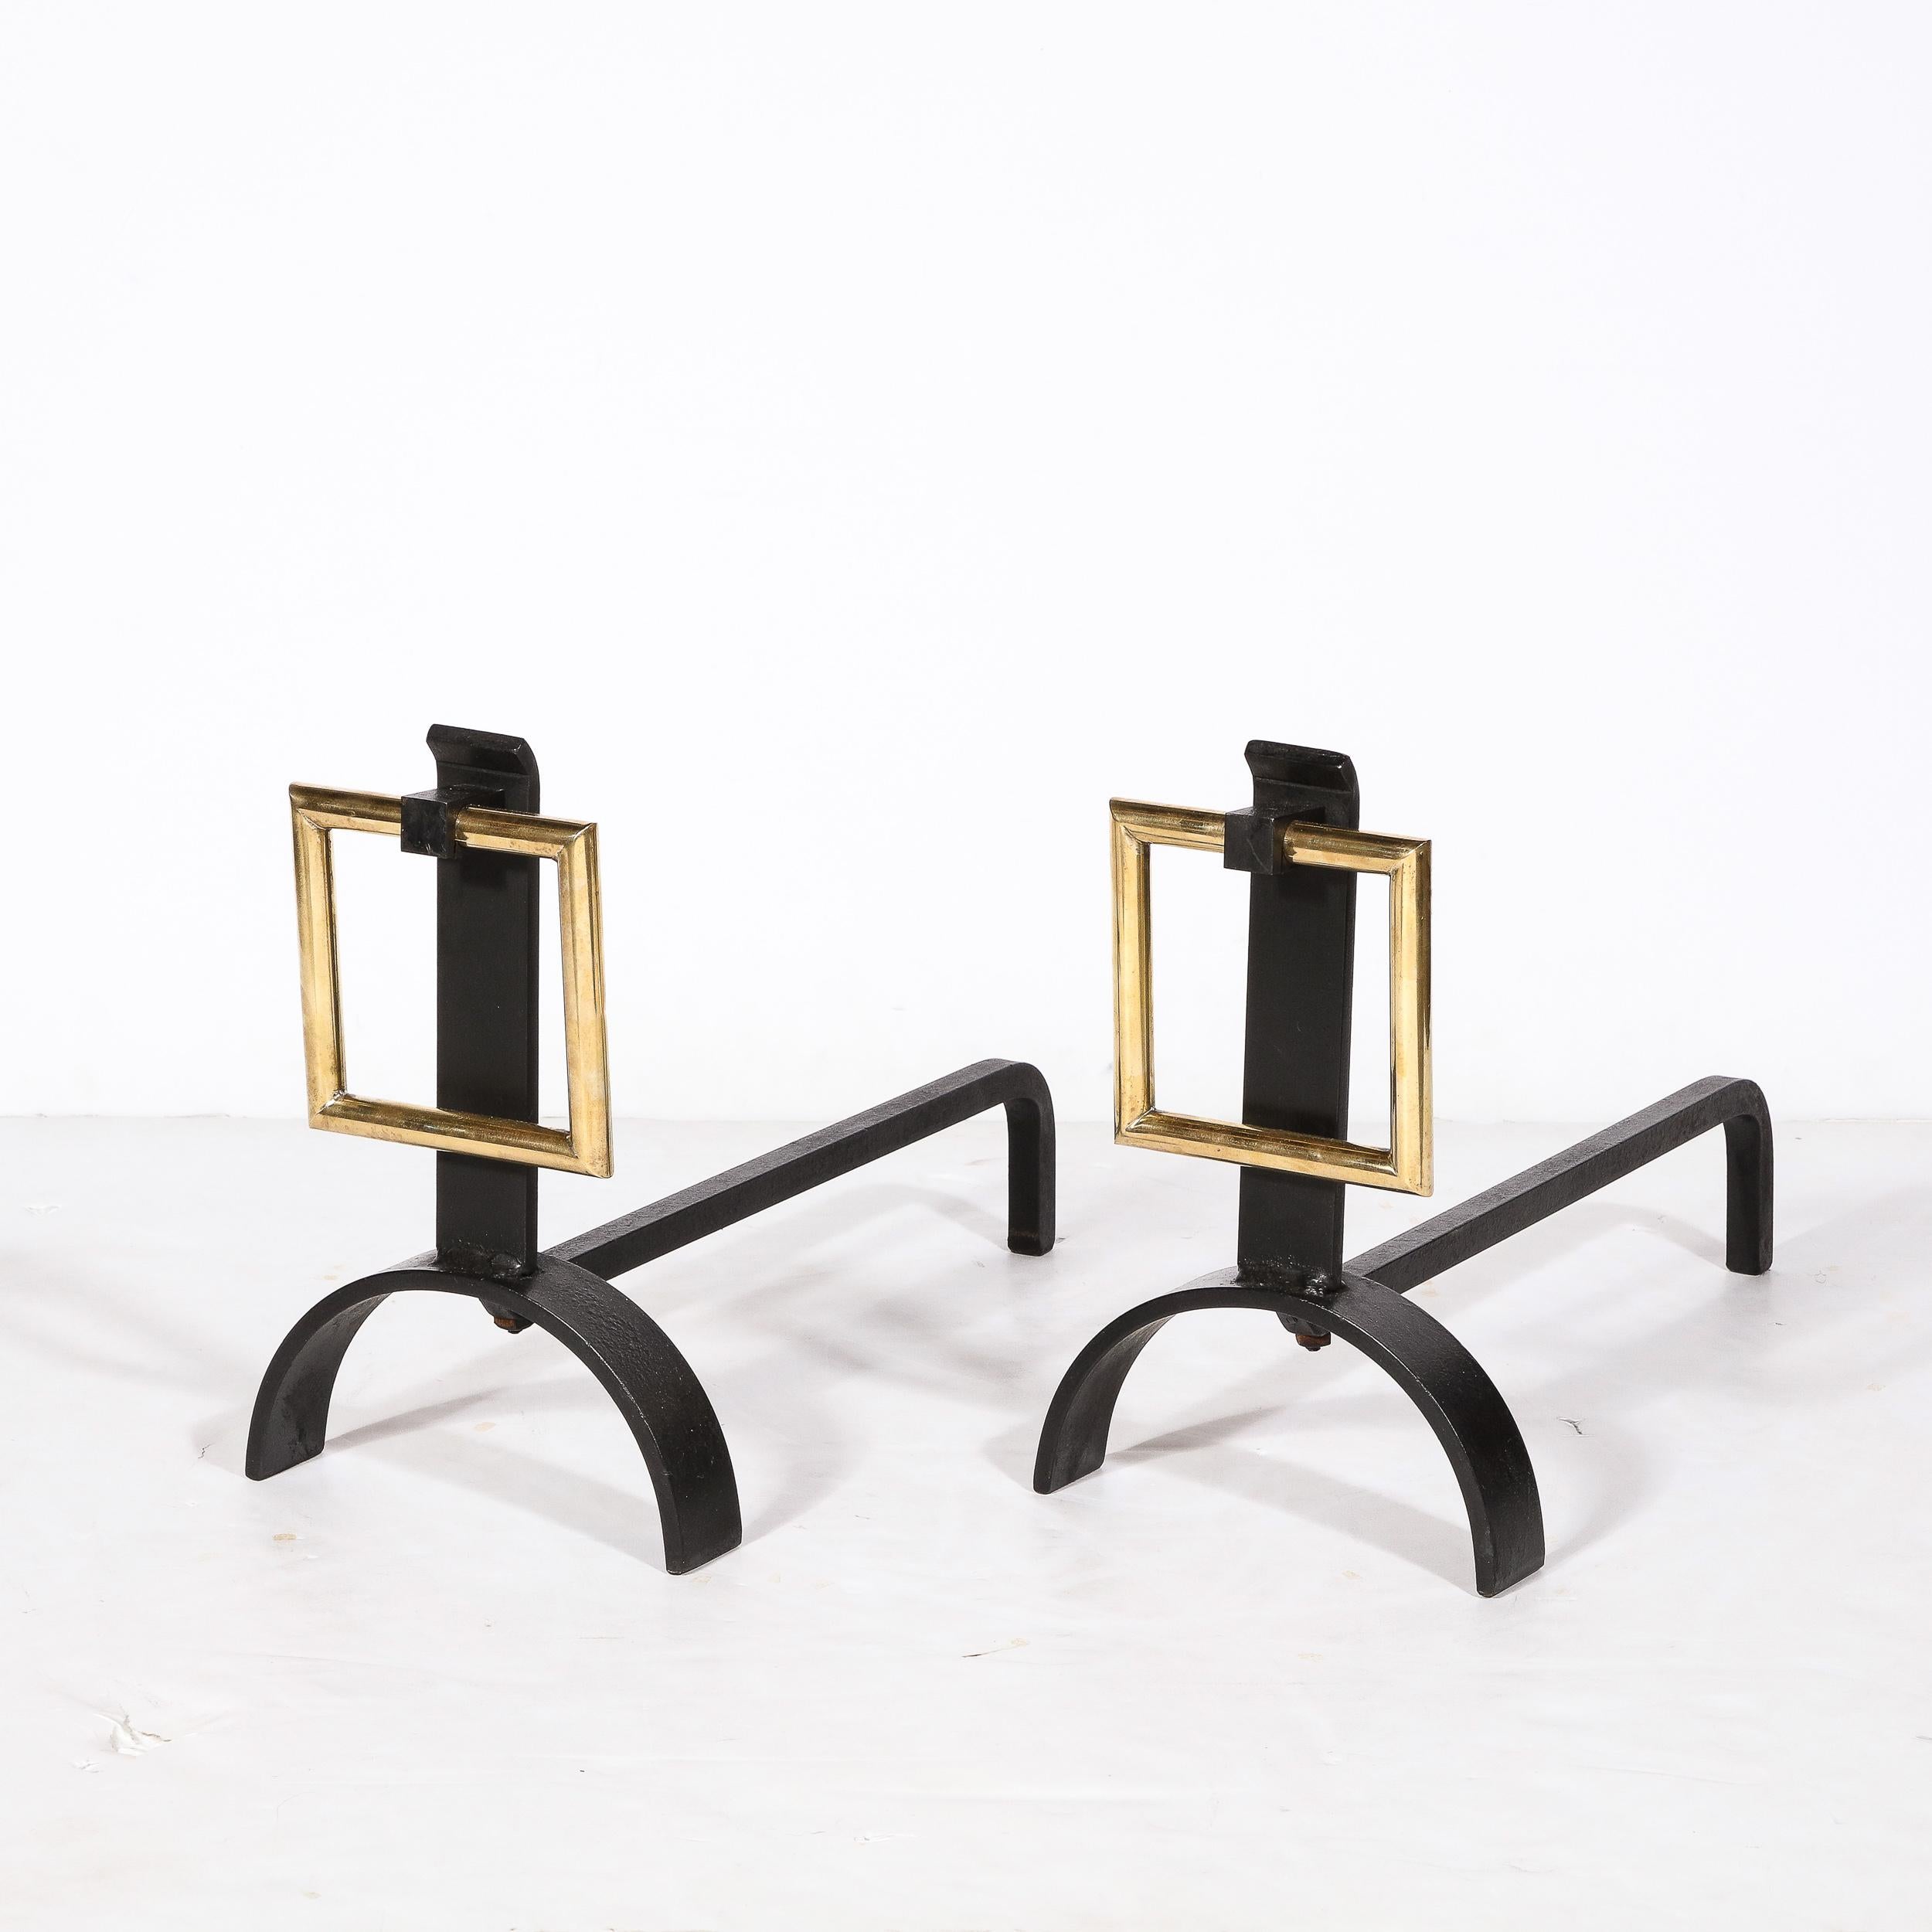 This dynamic yet reserved Pair of Mid-Century Modernist Buckle Form Andirons in Polished Brass & Black Enamel are by the esteemed designer Donald Deskey, originating from the United States, Circa 1950. Sleek and flawlessly executed, they feature a